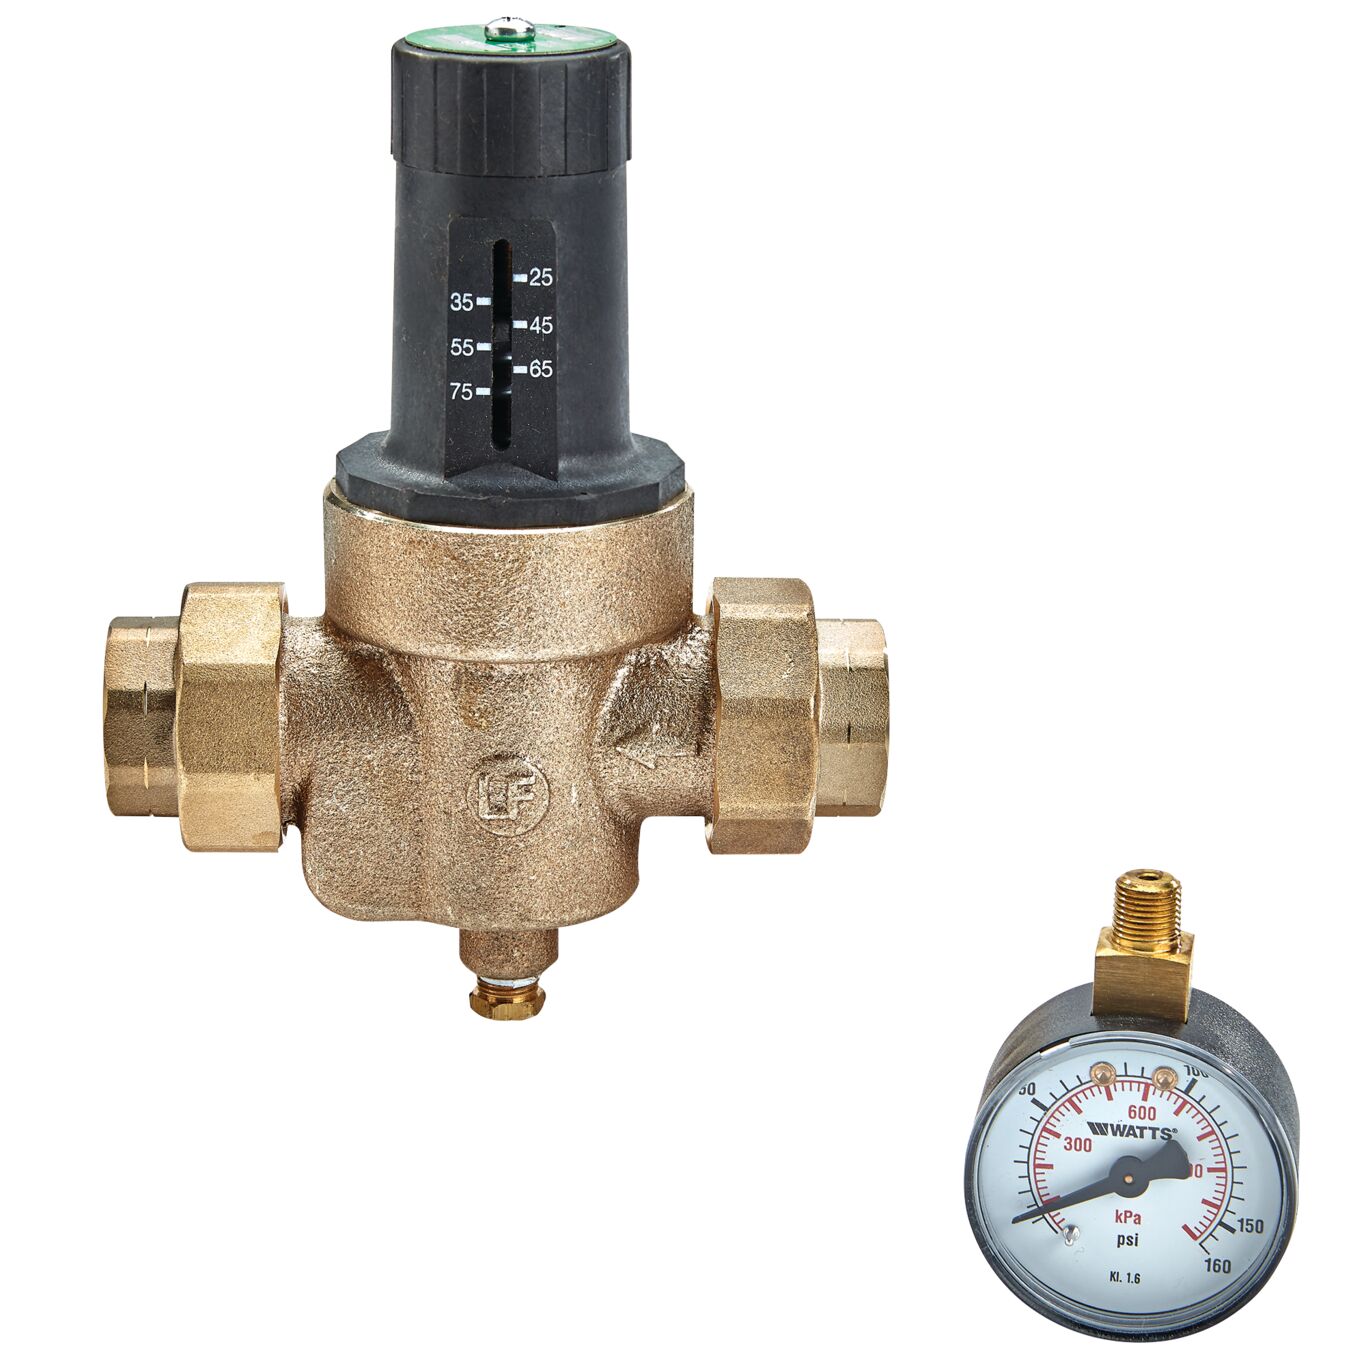 Product Image Lead Free Pressure Reducing Valve Double union